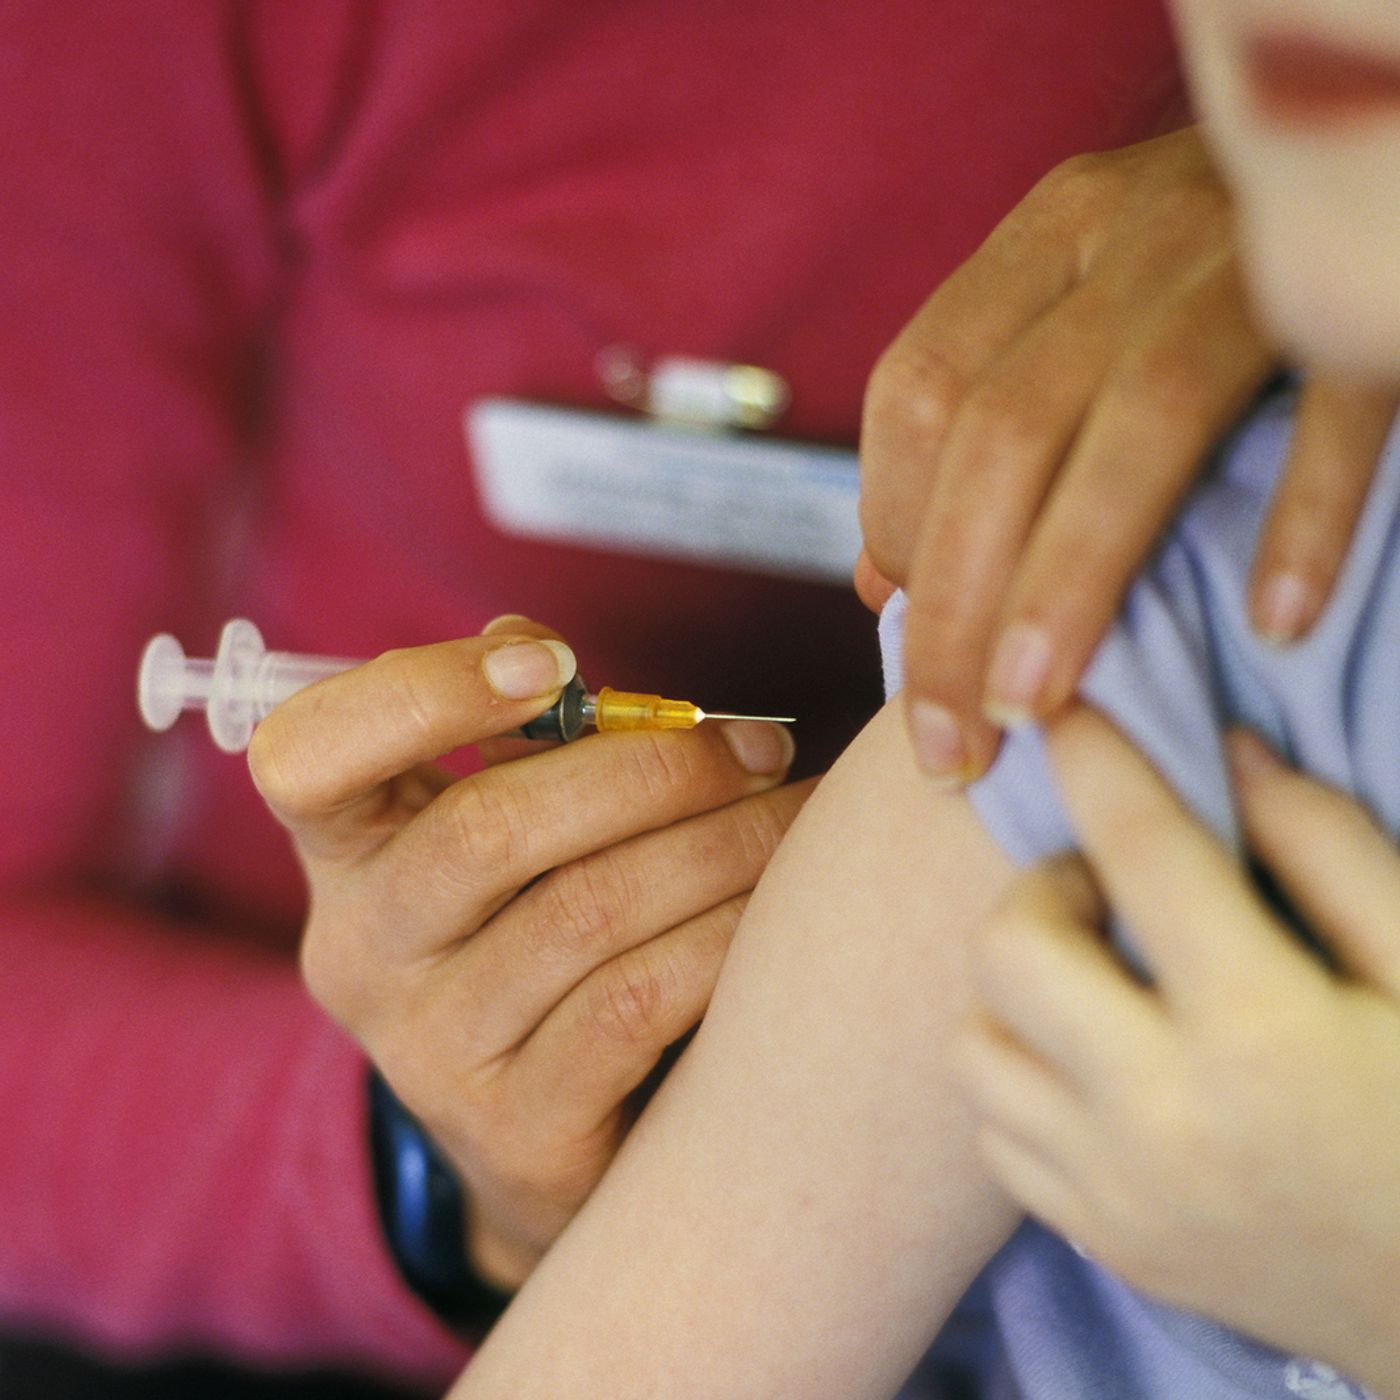 How to improve vaccine coverage of the MMR vaccine in your community